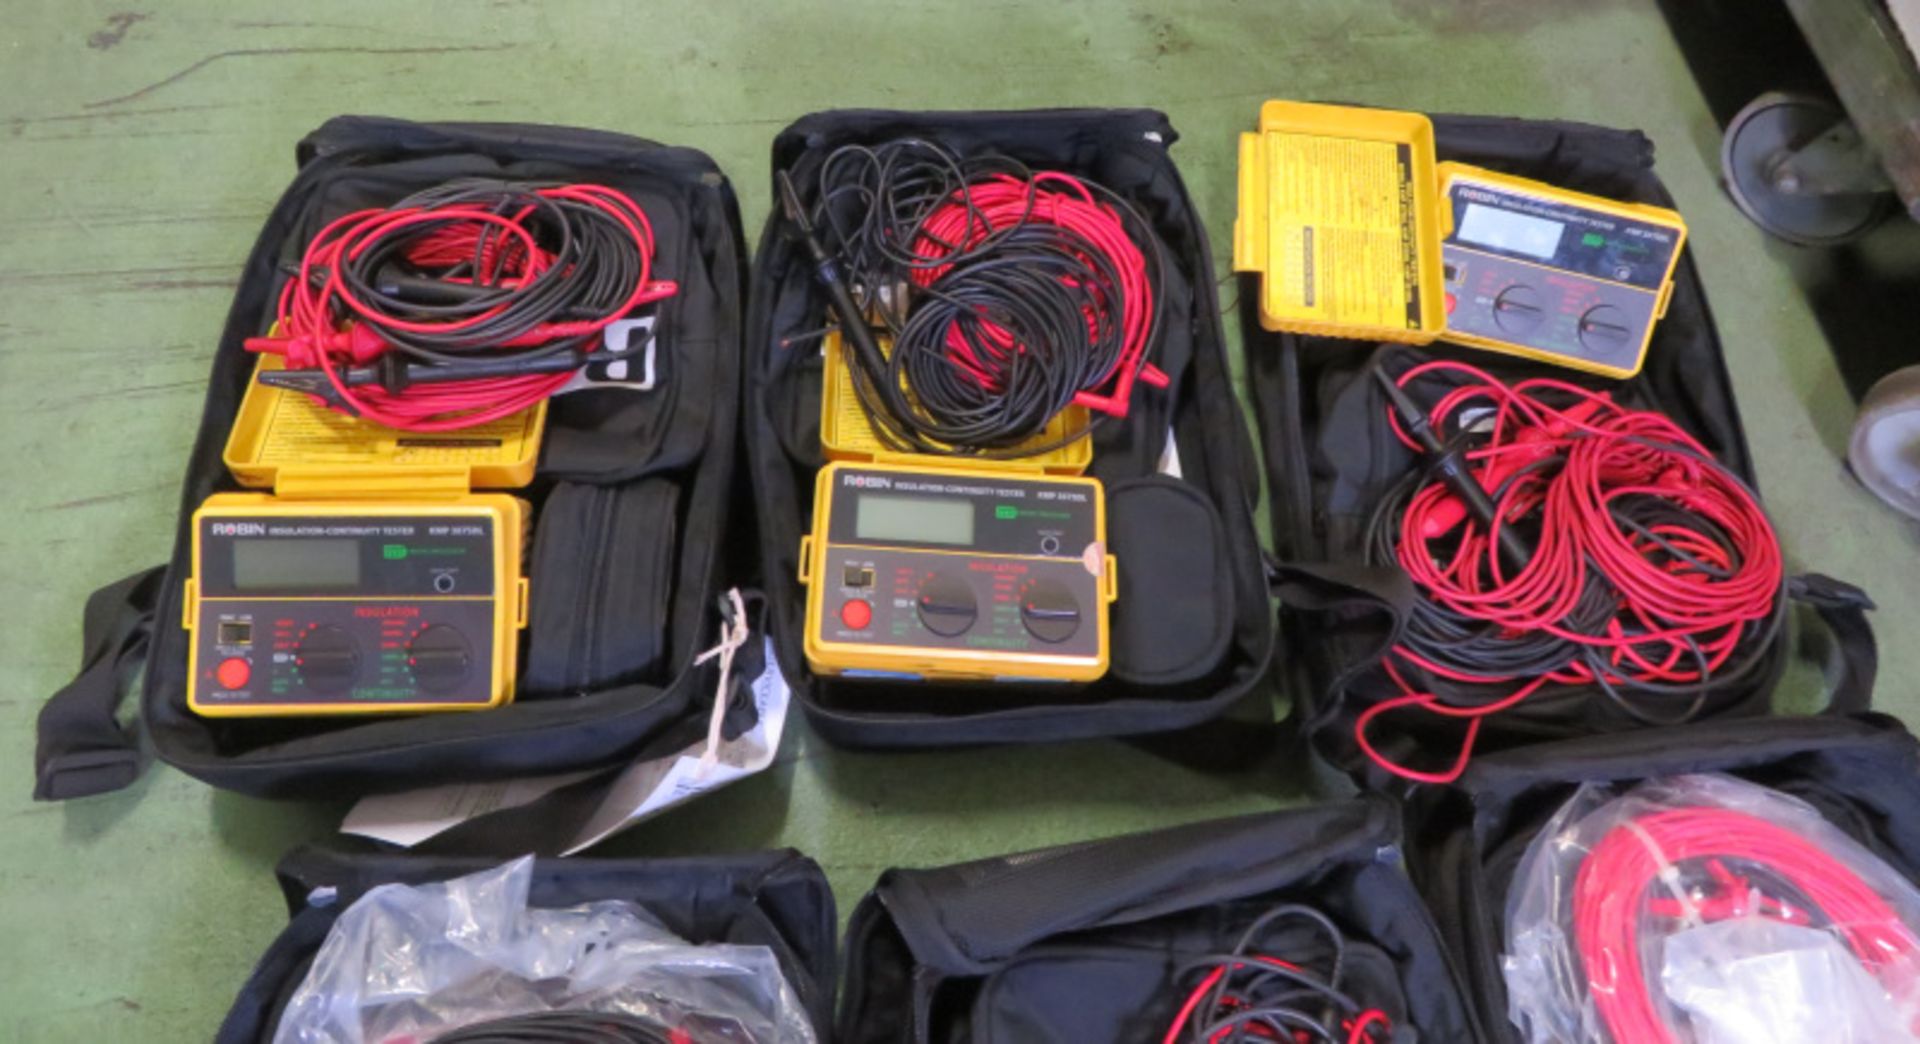 9x Robin Kmp 3075 DCL Continuity And Insulation GP testers in carry bags - Image 6 of 6